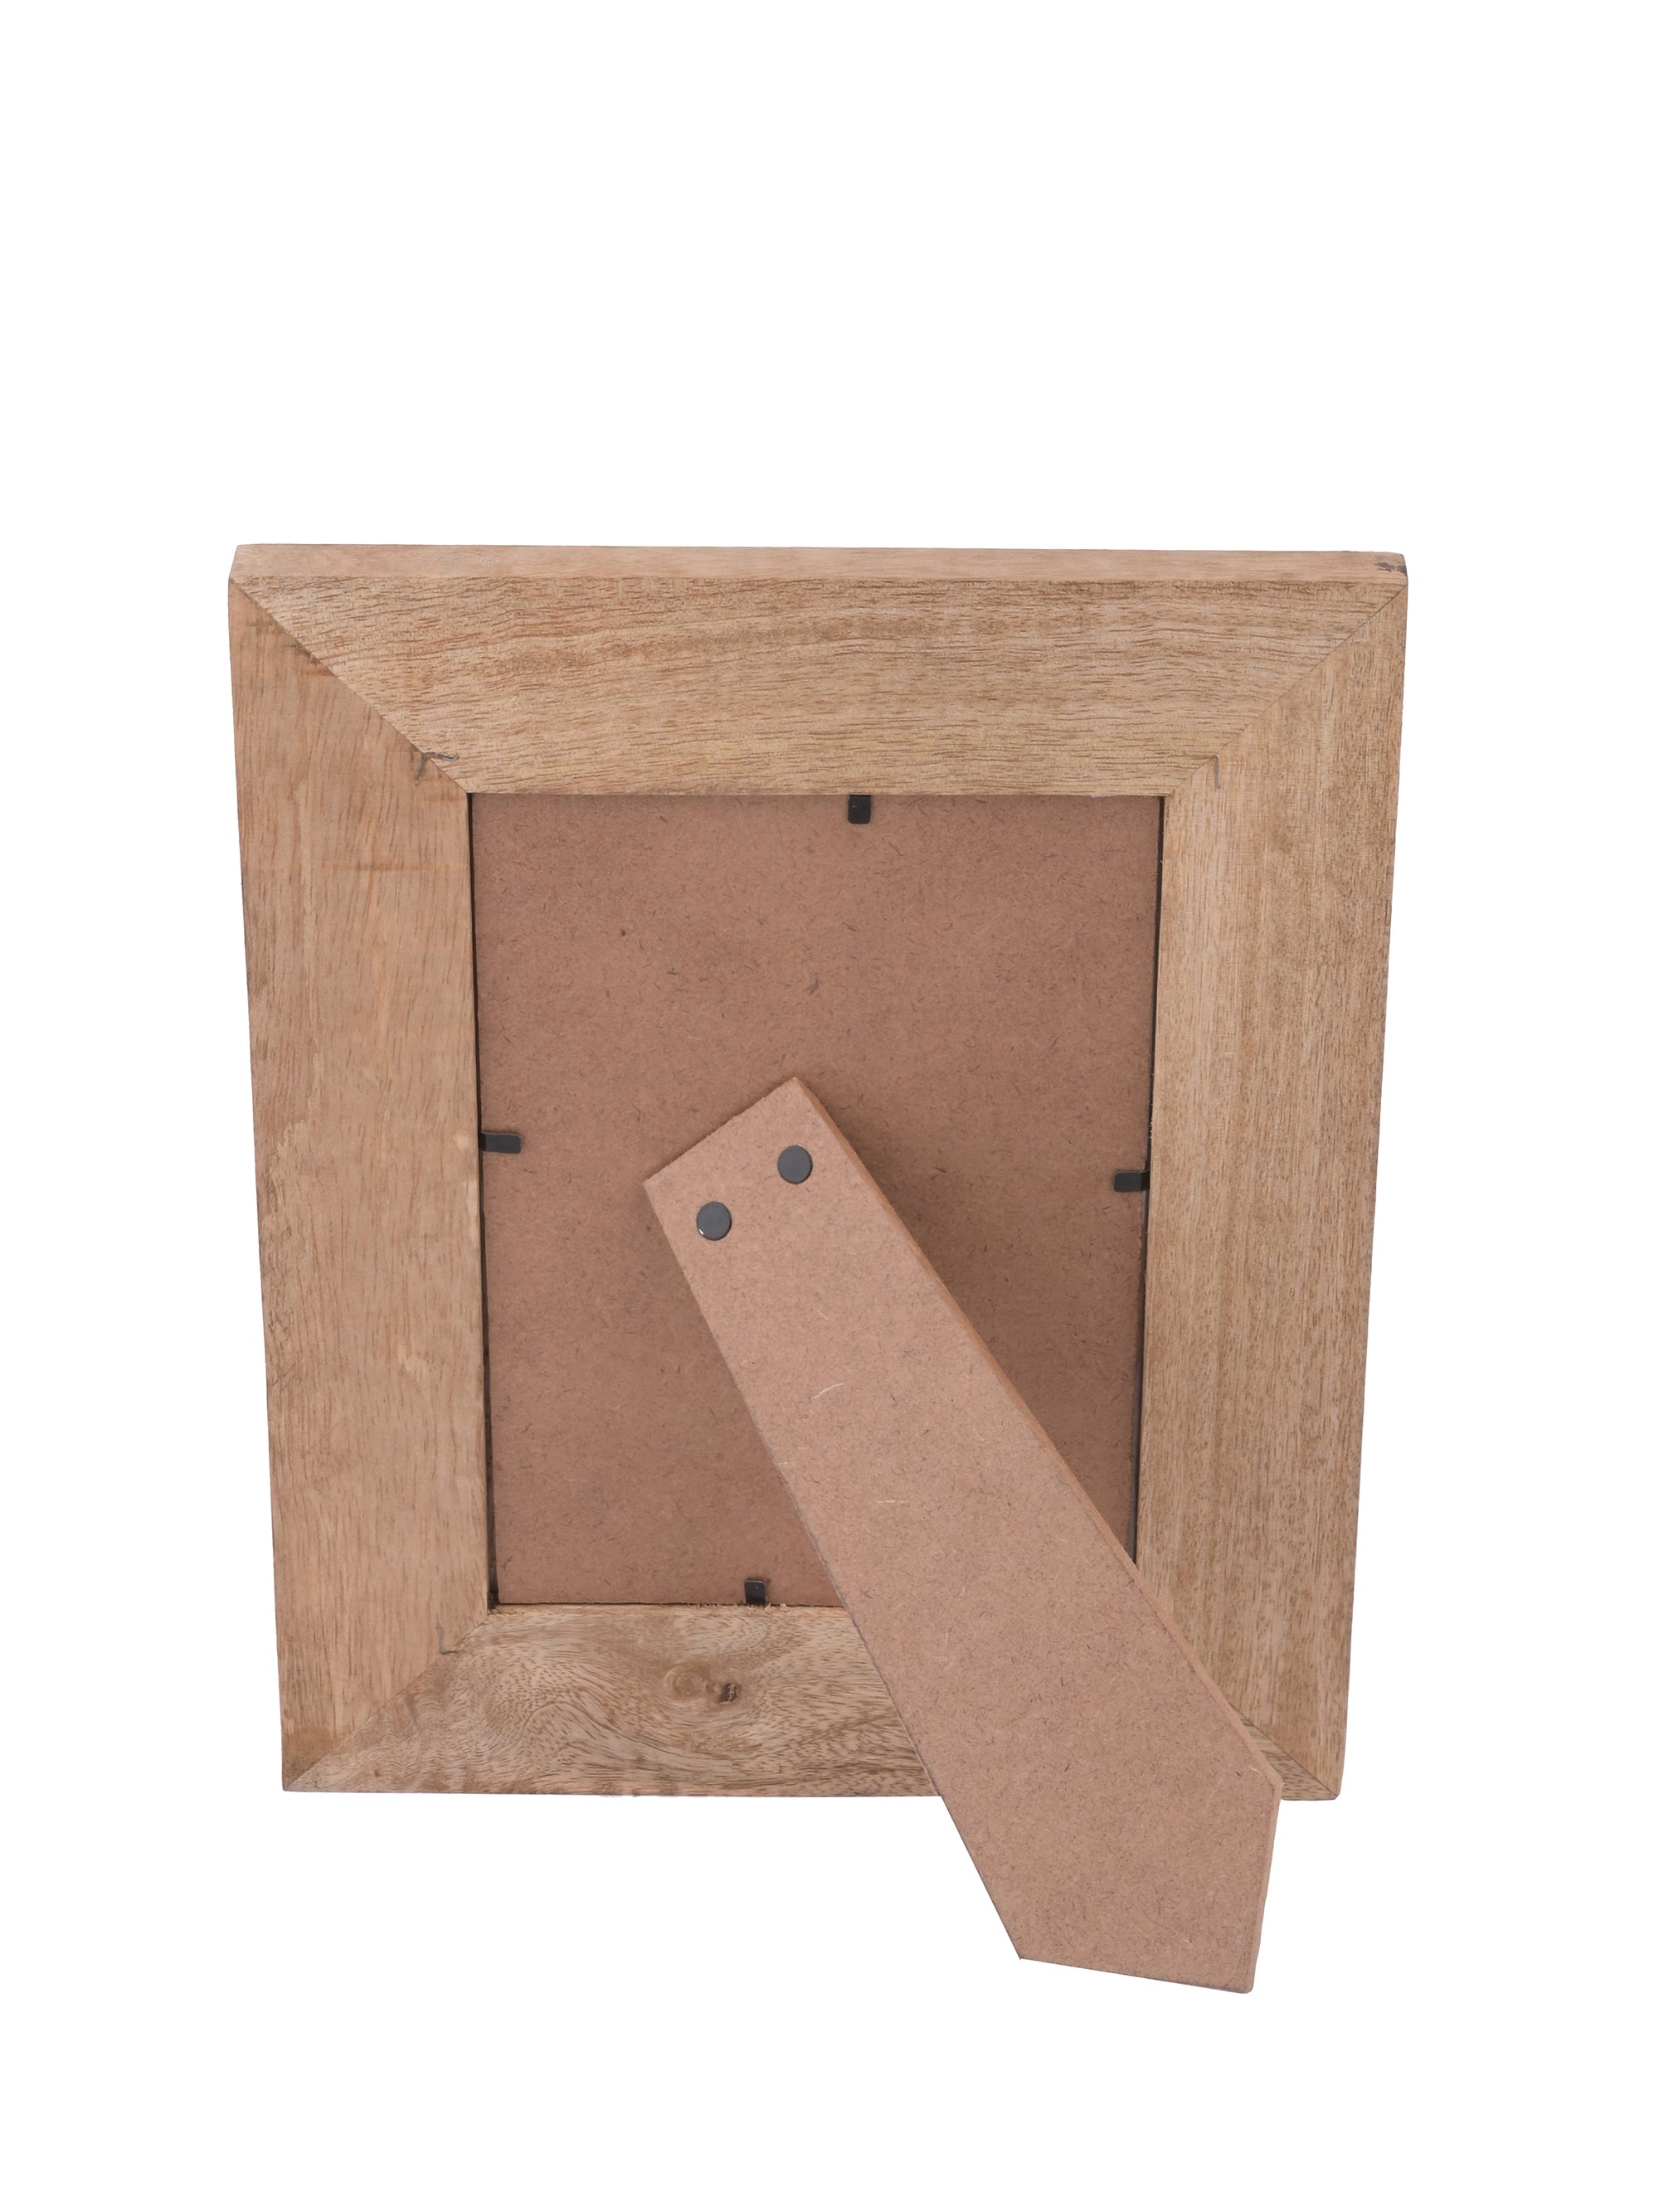 Natural Mango Wood, Rustic Look, Square shaped, Photo Frame - The Heritage Artifacts